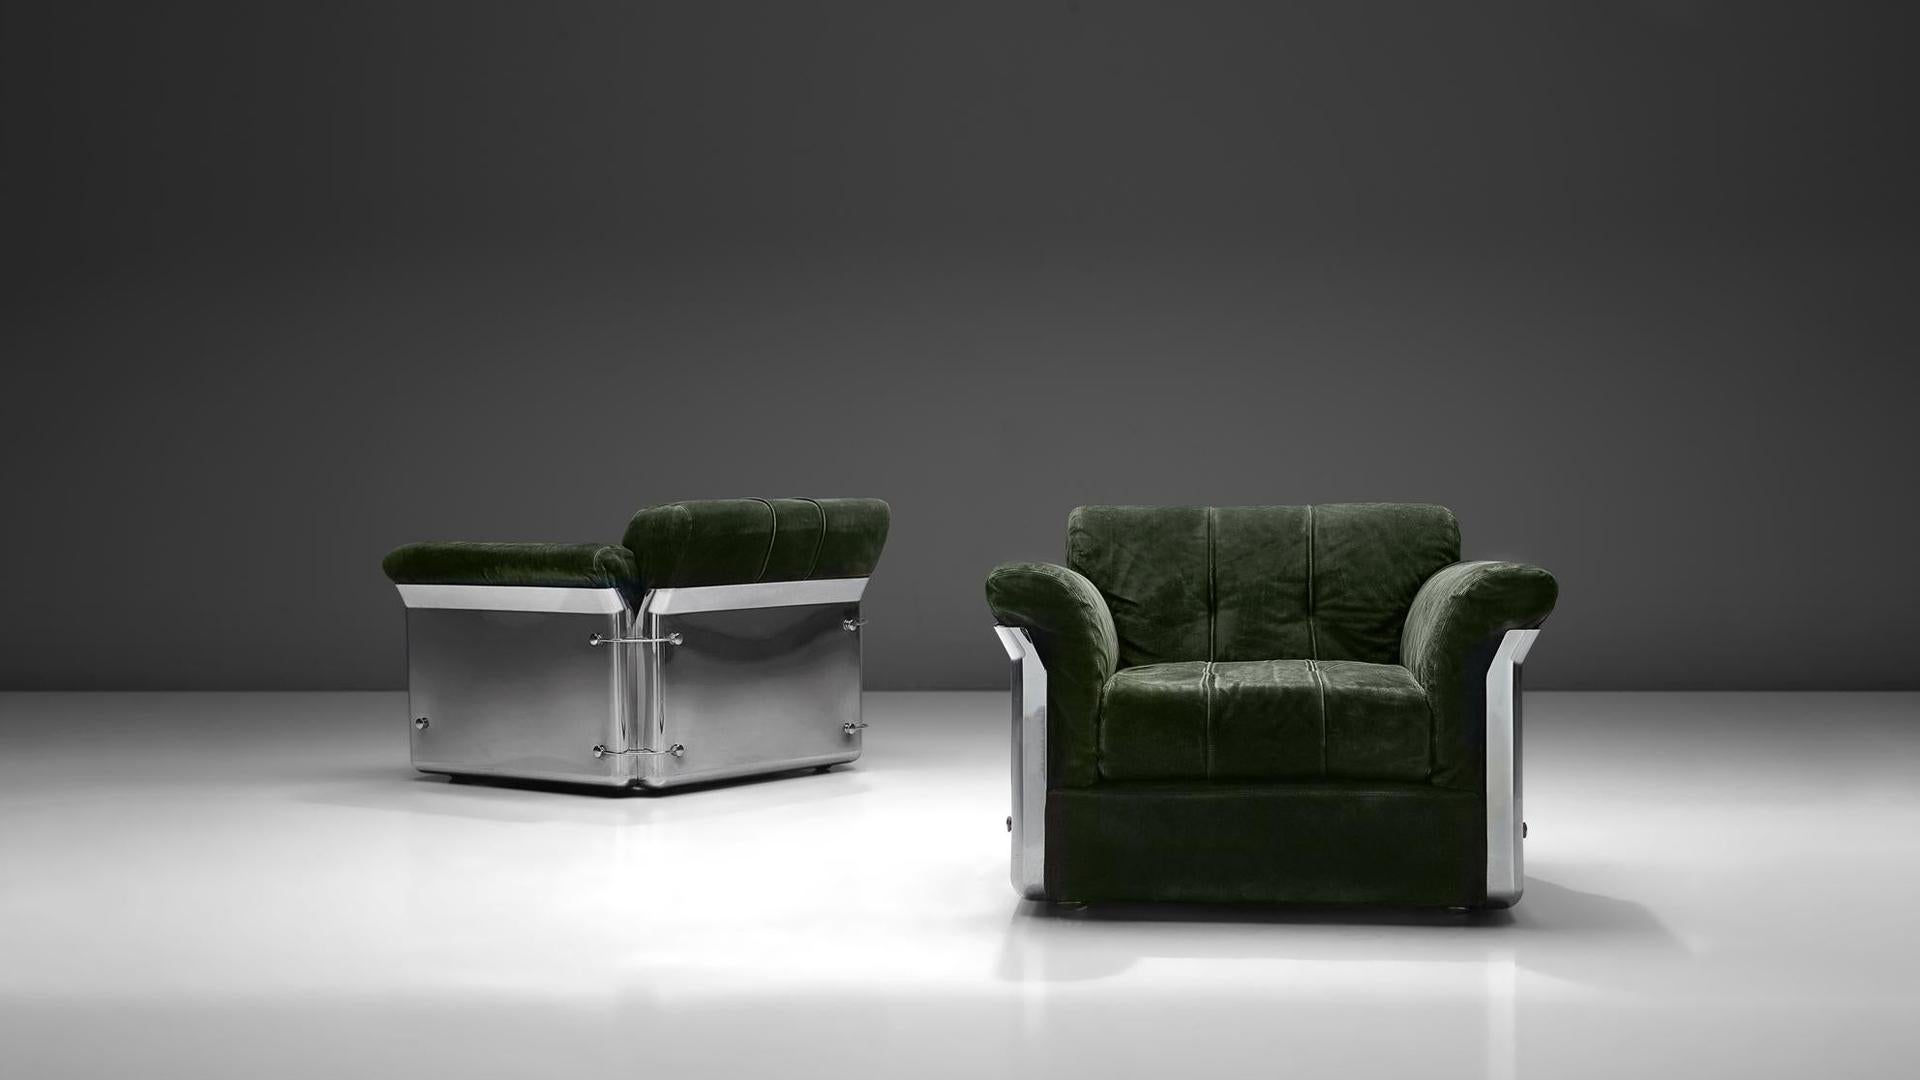 Vittorio Introini for Saporiti, pair of lounge chairs, in suede and chrome, Italy, 1969.

This set of two lounge chairs is designed by Vittorio Introini and produced by Saporiti in chrome and dark green upholstery. The lounge chairs feature a steel